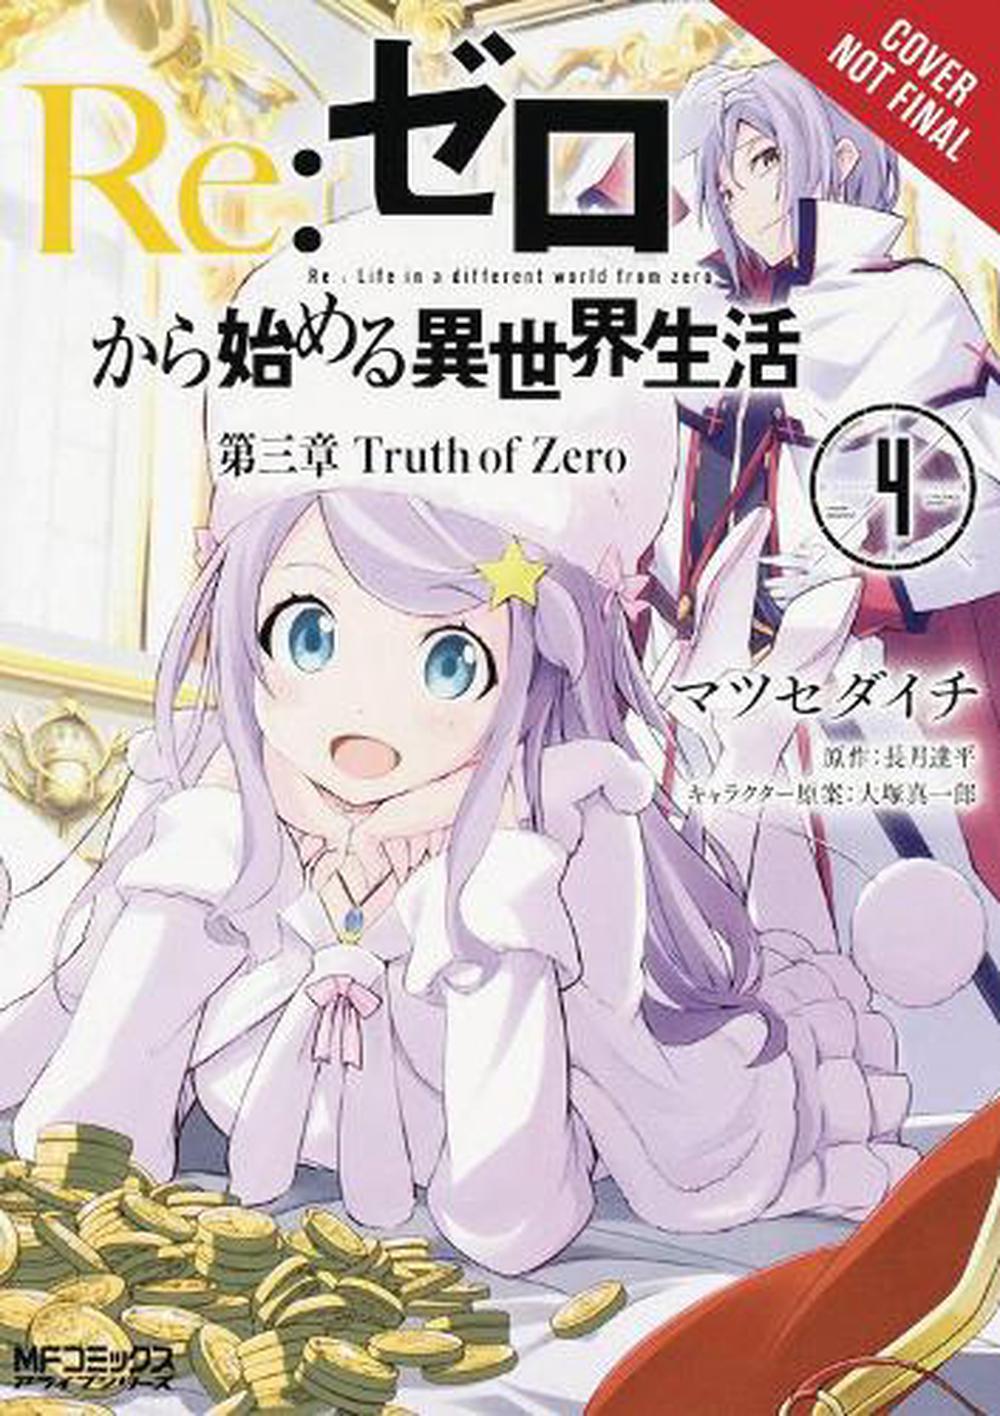 Re Zero Starting Life In Another World Chapter 3 Truth Of Zero Vol 4 By Tappei Nagatsuki Paperback Buy Online At The Nile